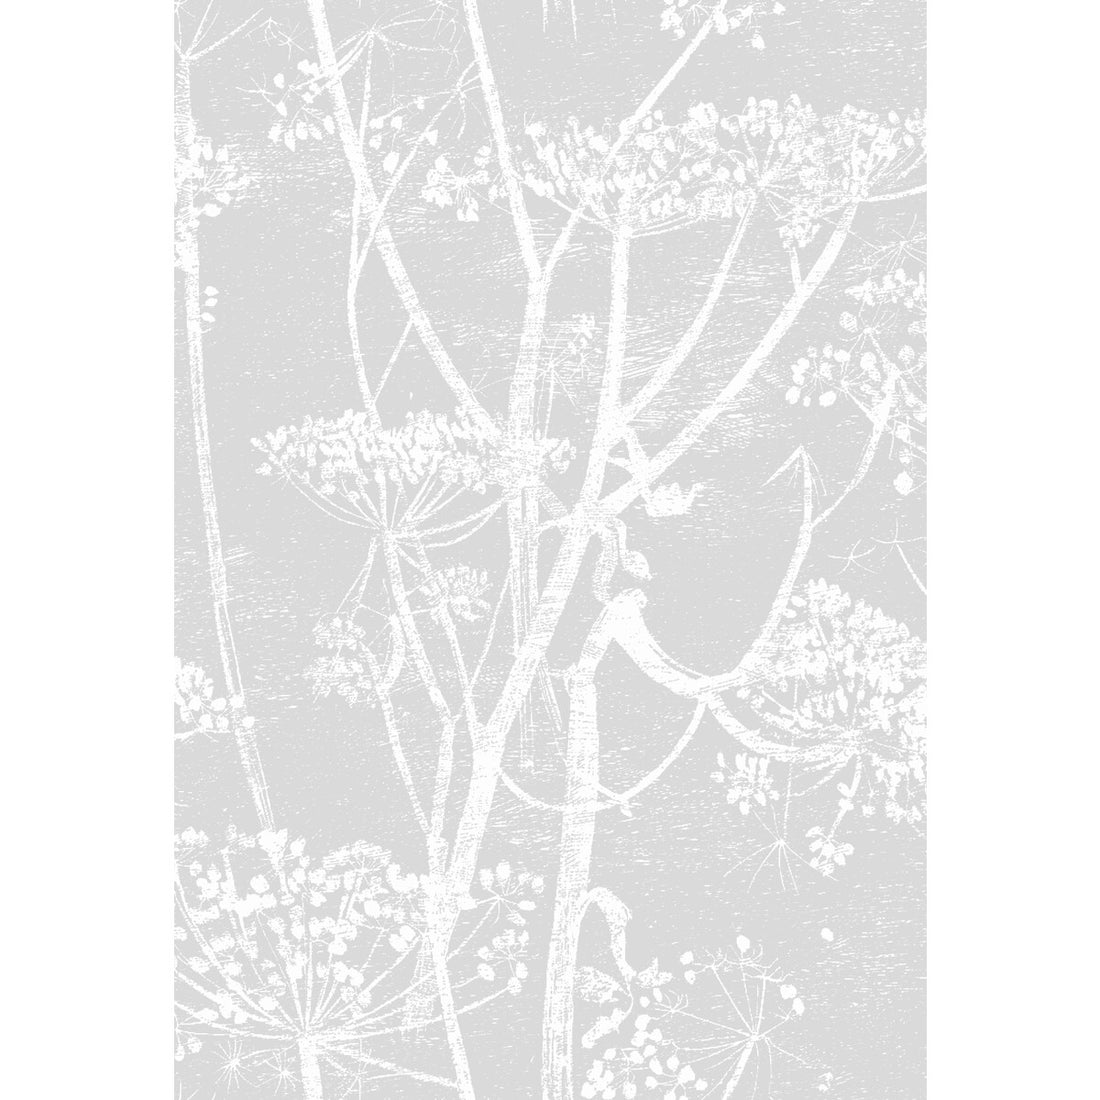 Cow Parsley fabric in soft grey color - pattern F111/5021.CS.0 - by Cole &amp; Son in the Cole &amp; Son Contemporary Fabrics collection